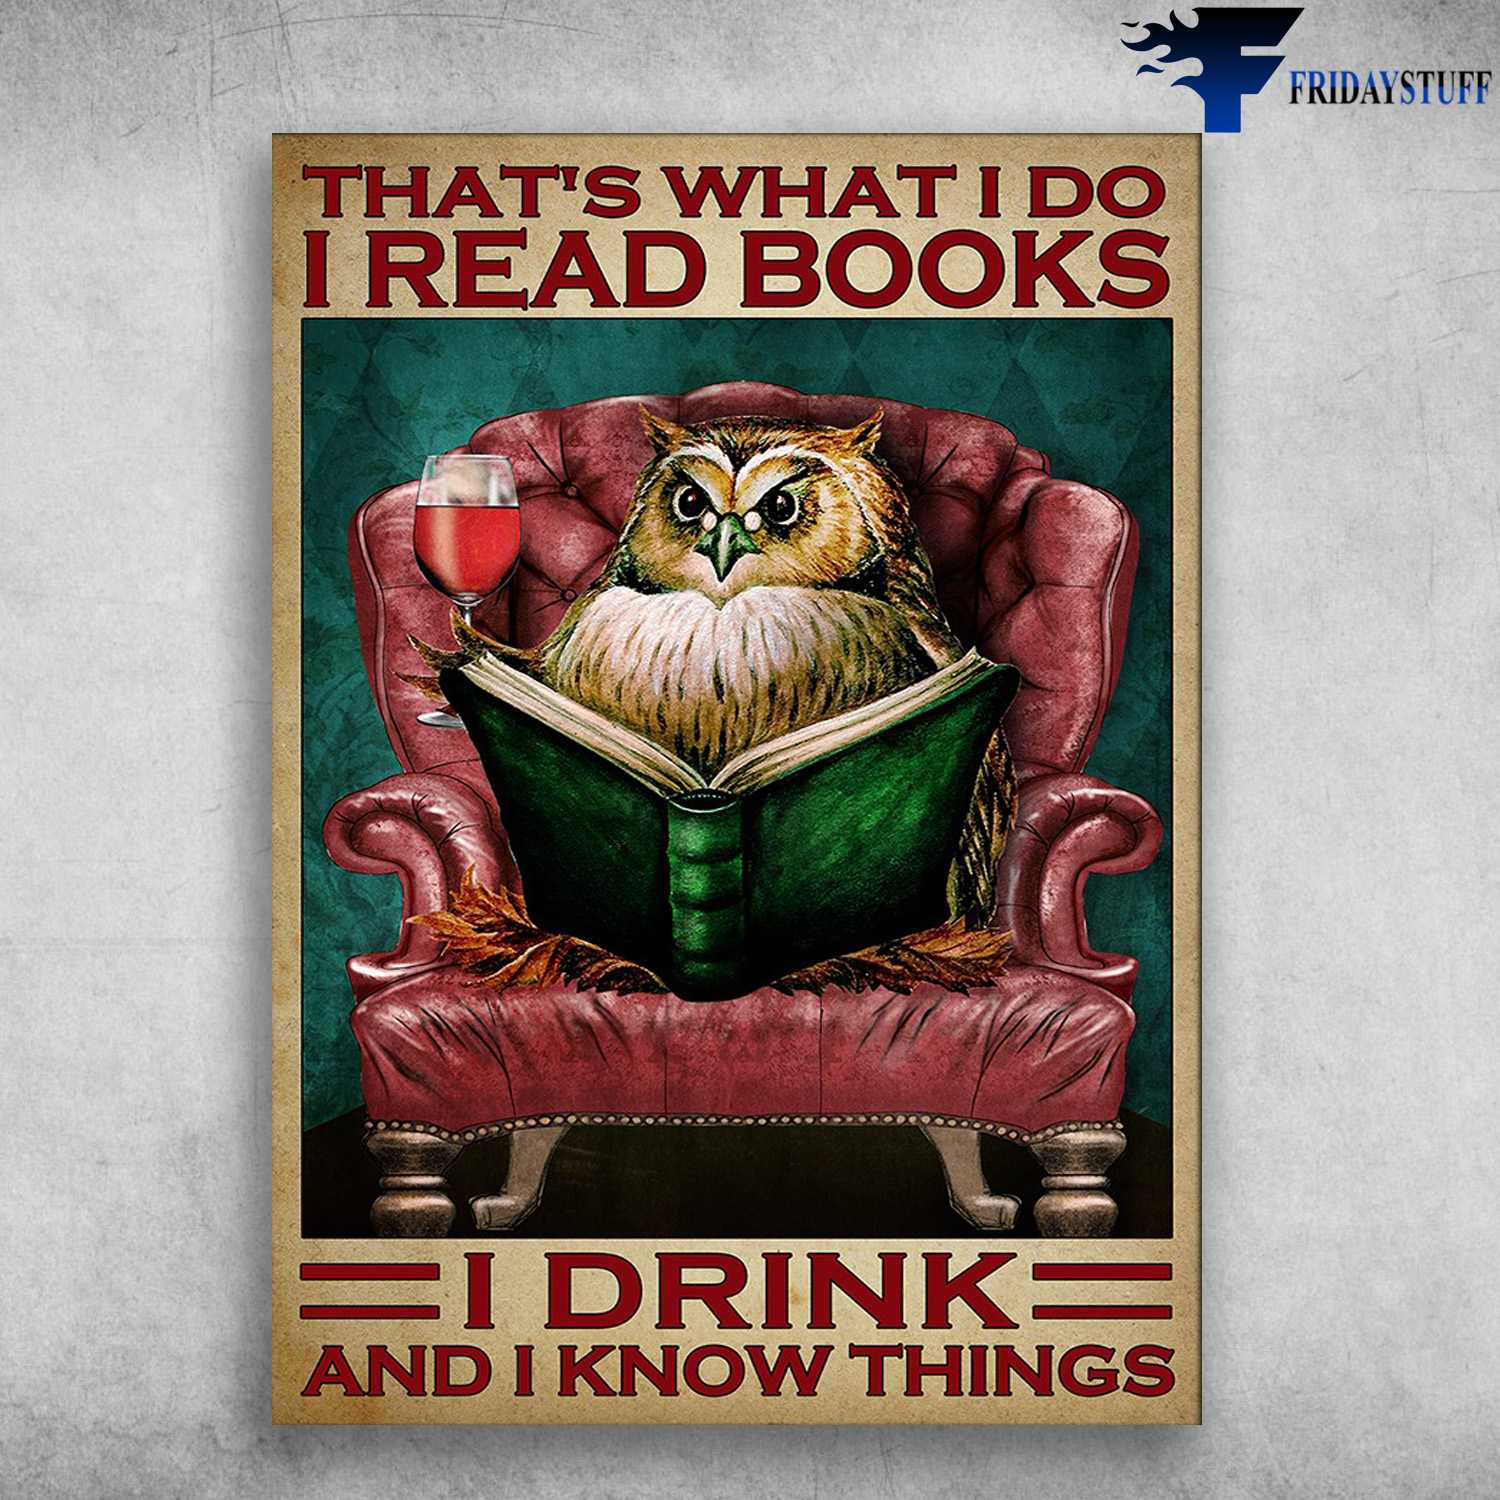 Owl Reads Book, Drink Wine - That's What I Do, I Read Books, I Drink, And I Know Things